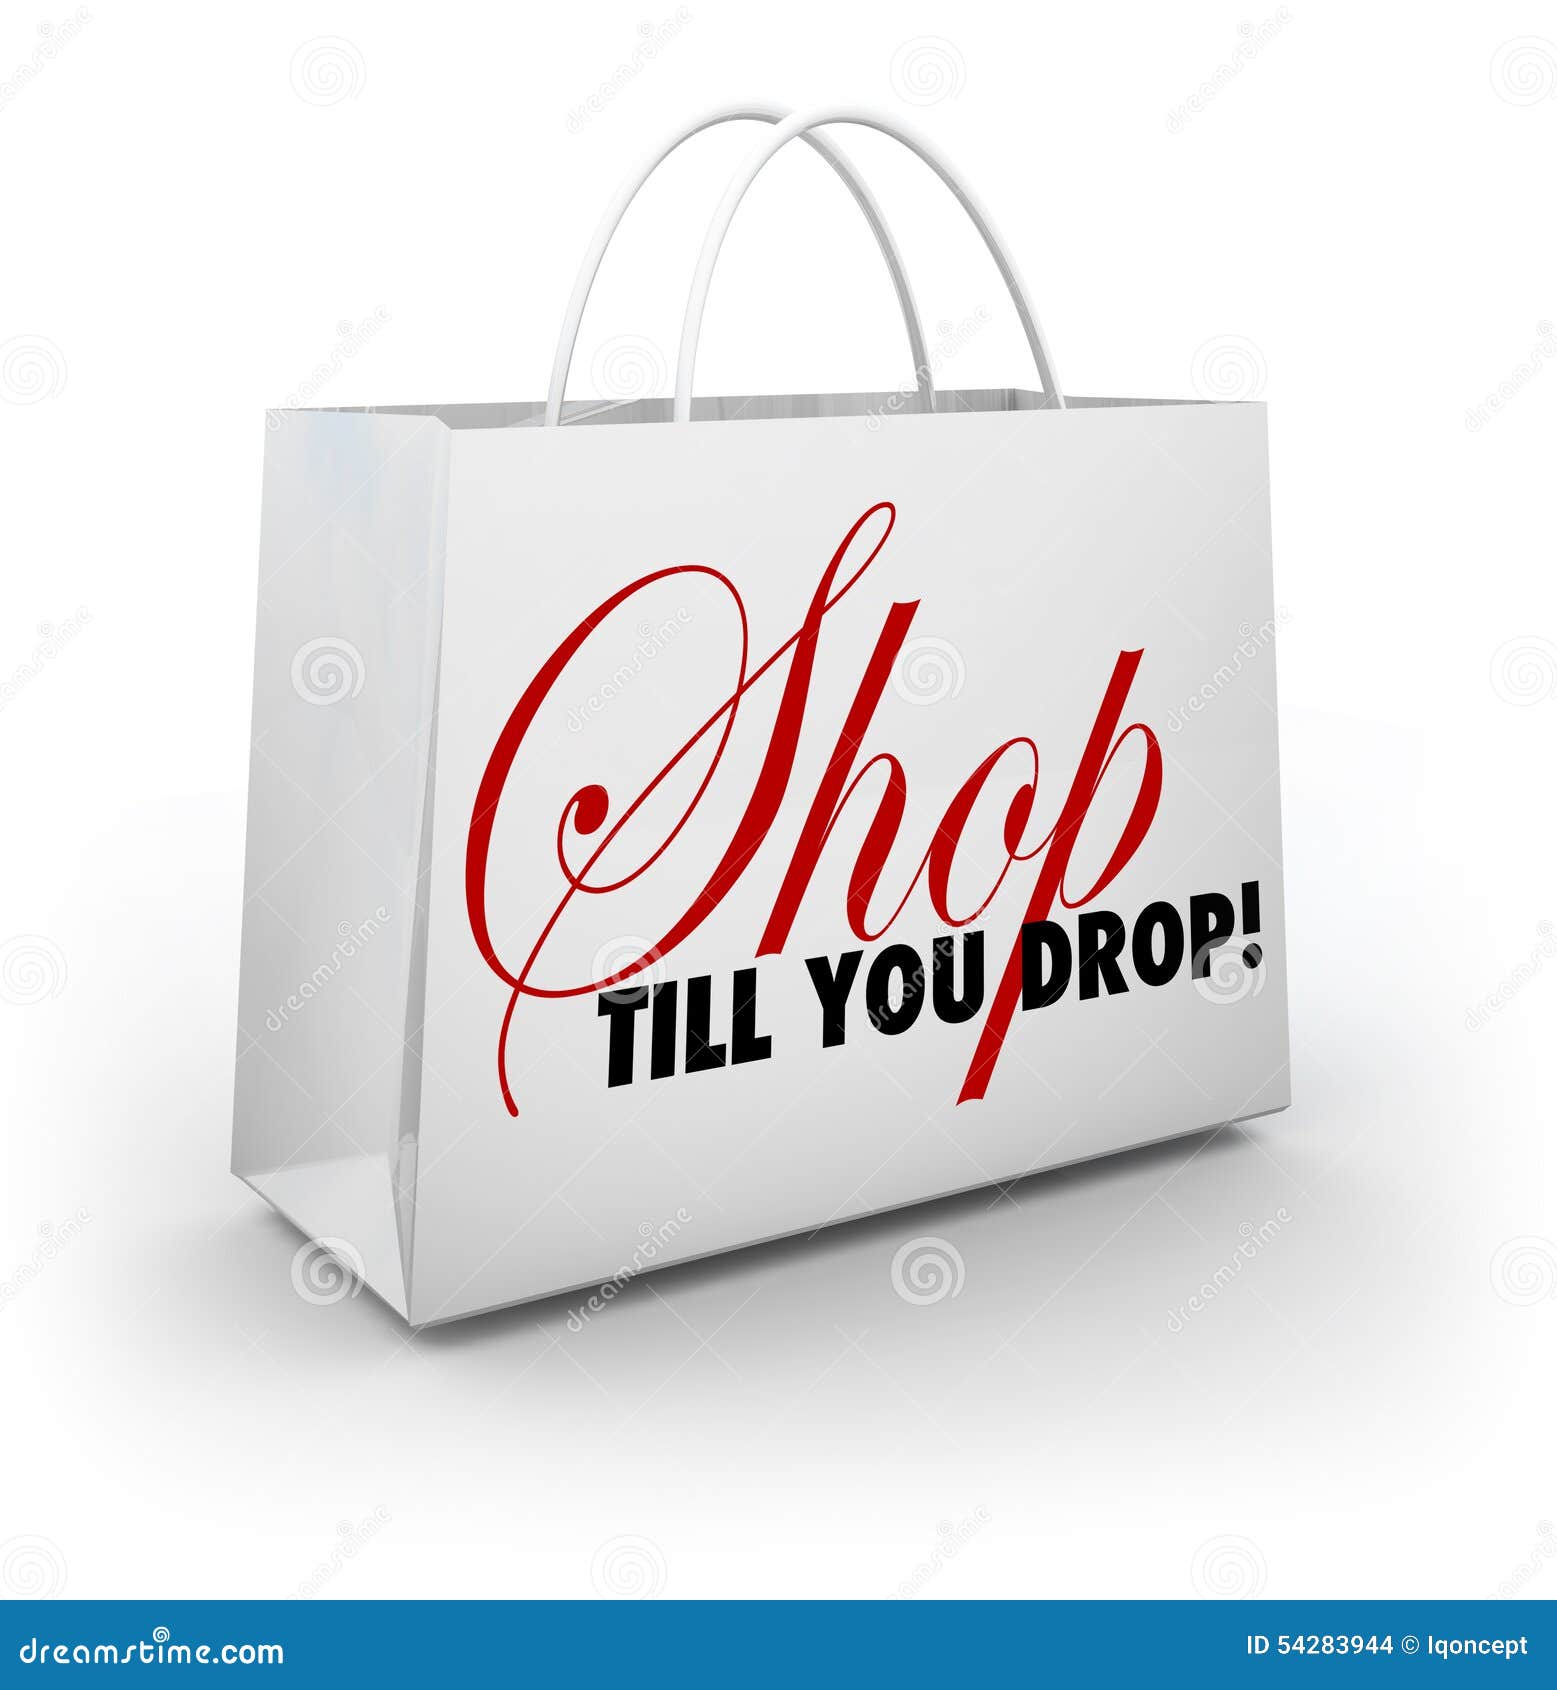 Shop till you drop meaning